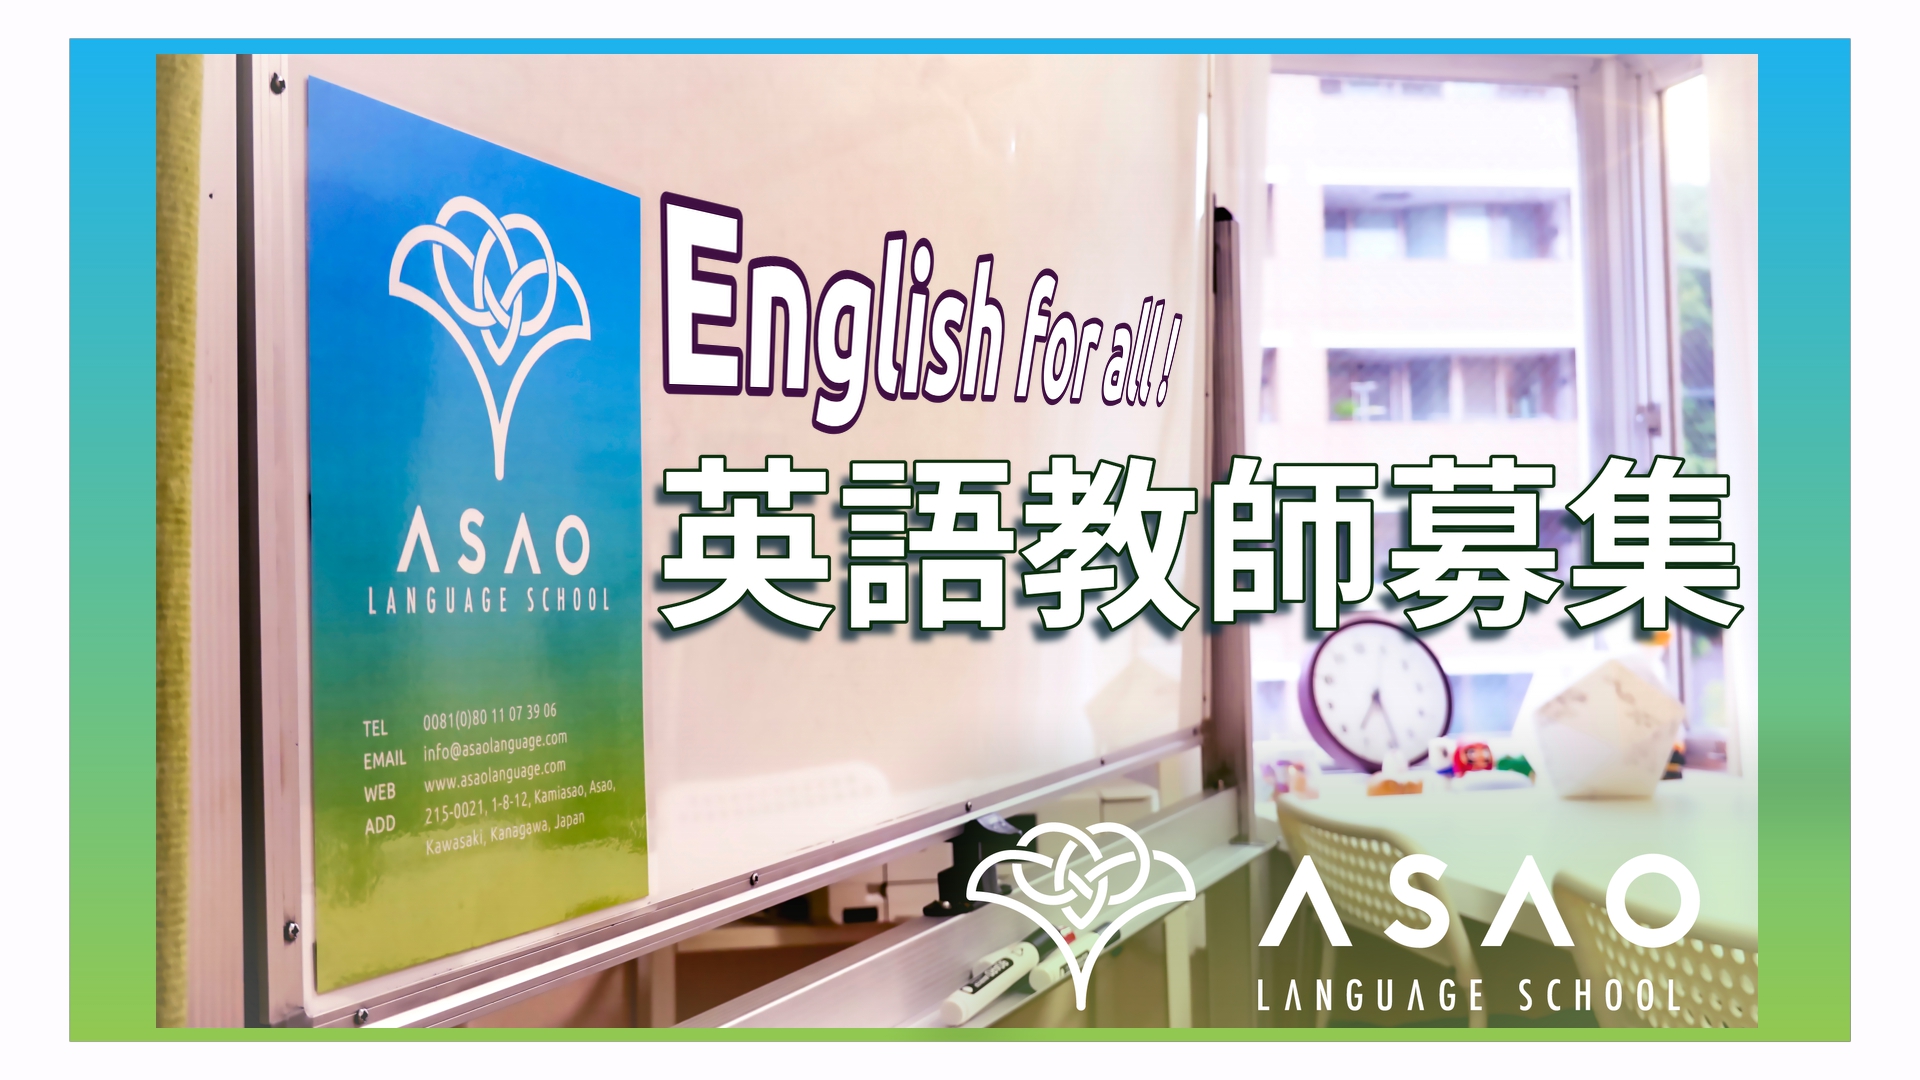 Looking for Private English Teachers - アルバイト英語教師募集